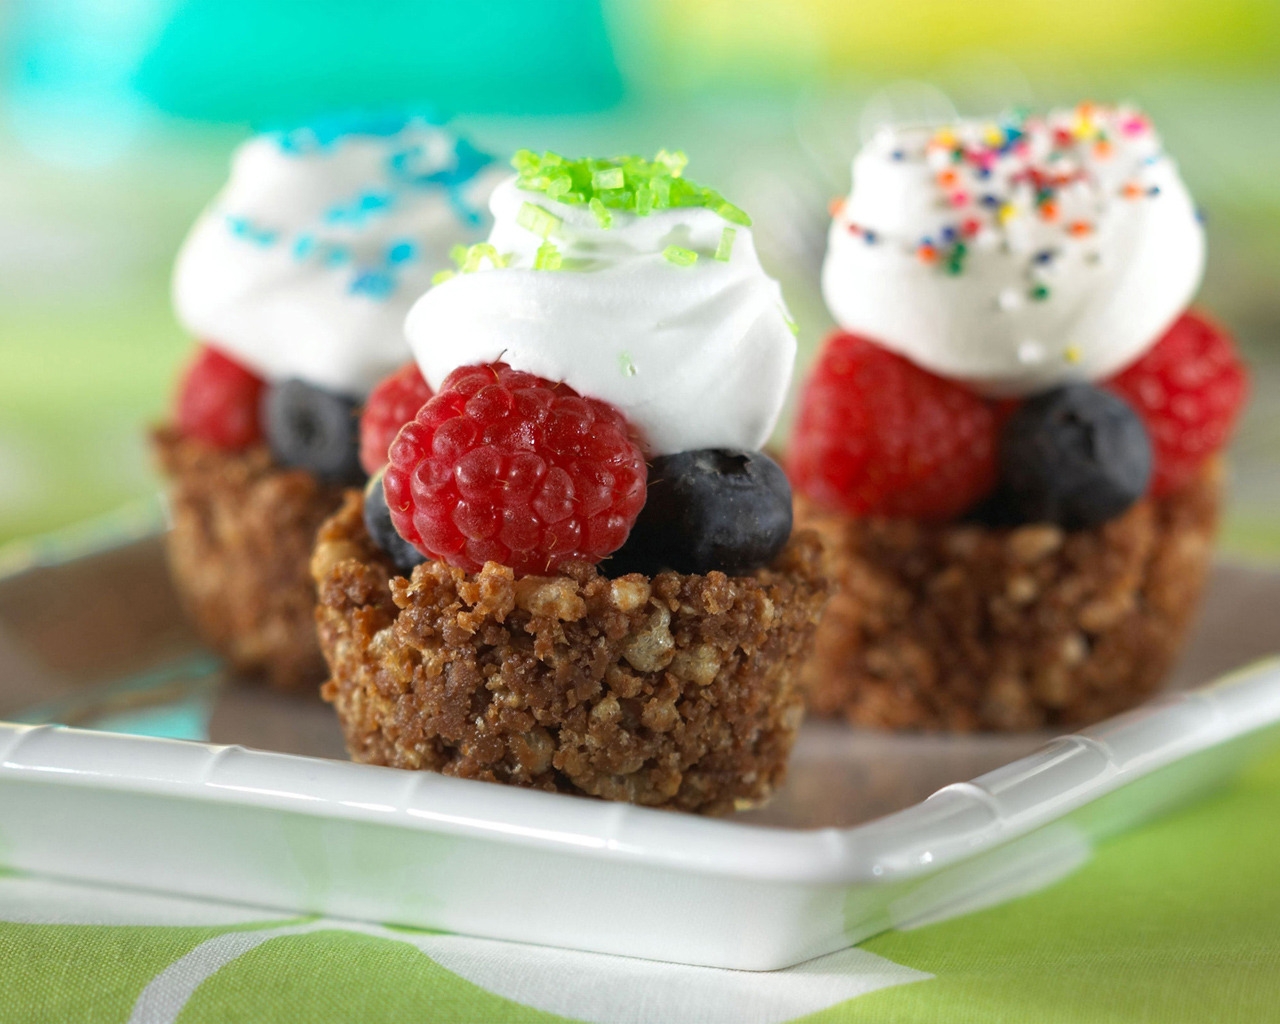 Cereal and Fruits Cakes for 1280 x 1024 resolution